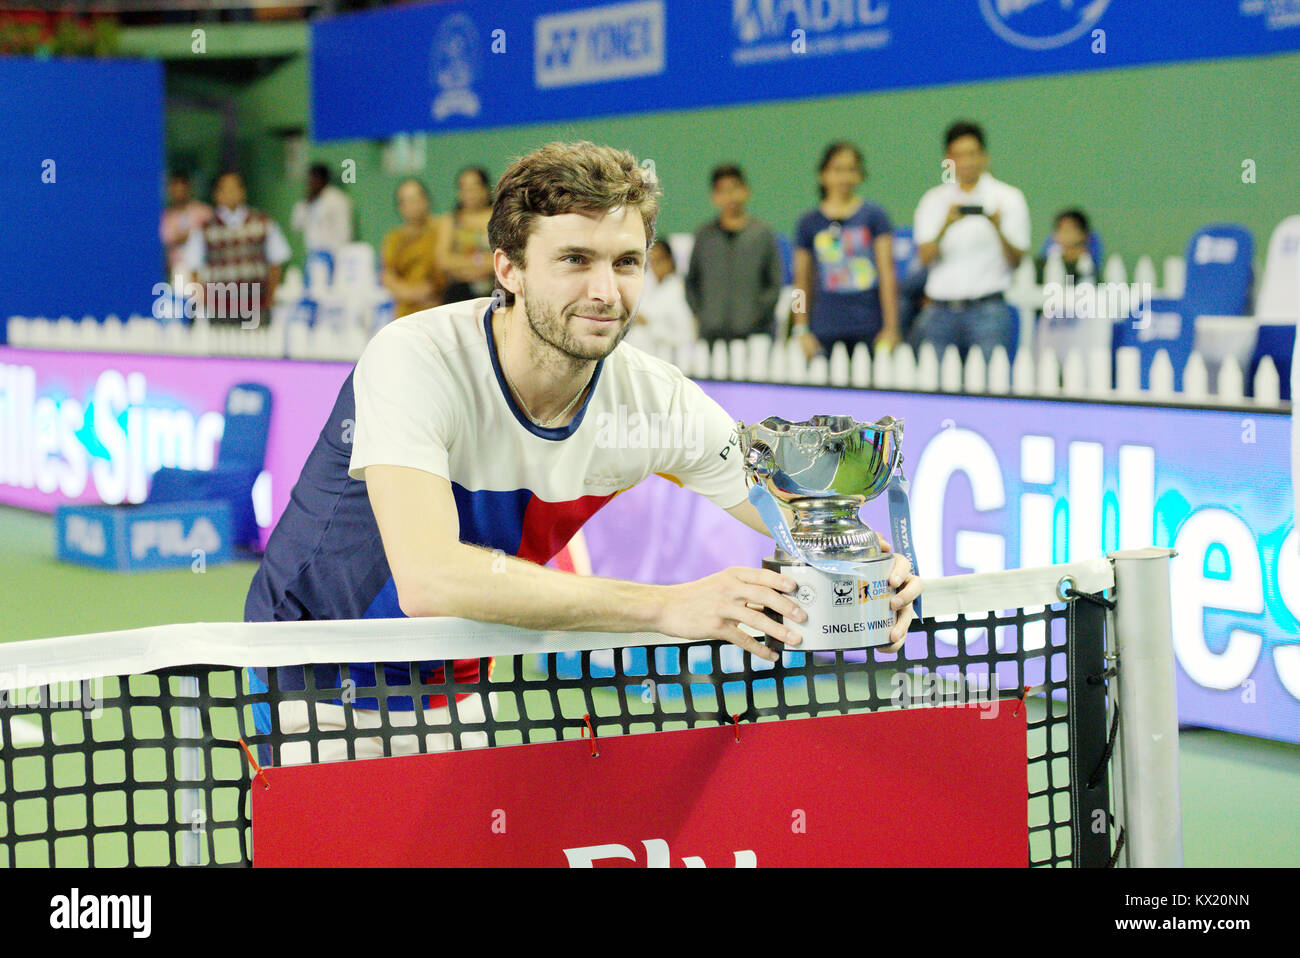 Pune, India. 6th January 2018. Gilles Simon of France with the singles trophy after winning the finals at the Tata Open Maharashtra tournament at Mahalunge Balewadi Tennis Stadium in Pune, India. Credit: Karunesh Johri/Alamy Live News. Stock Photo